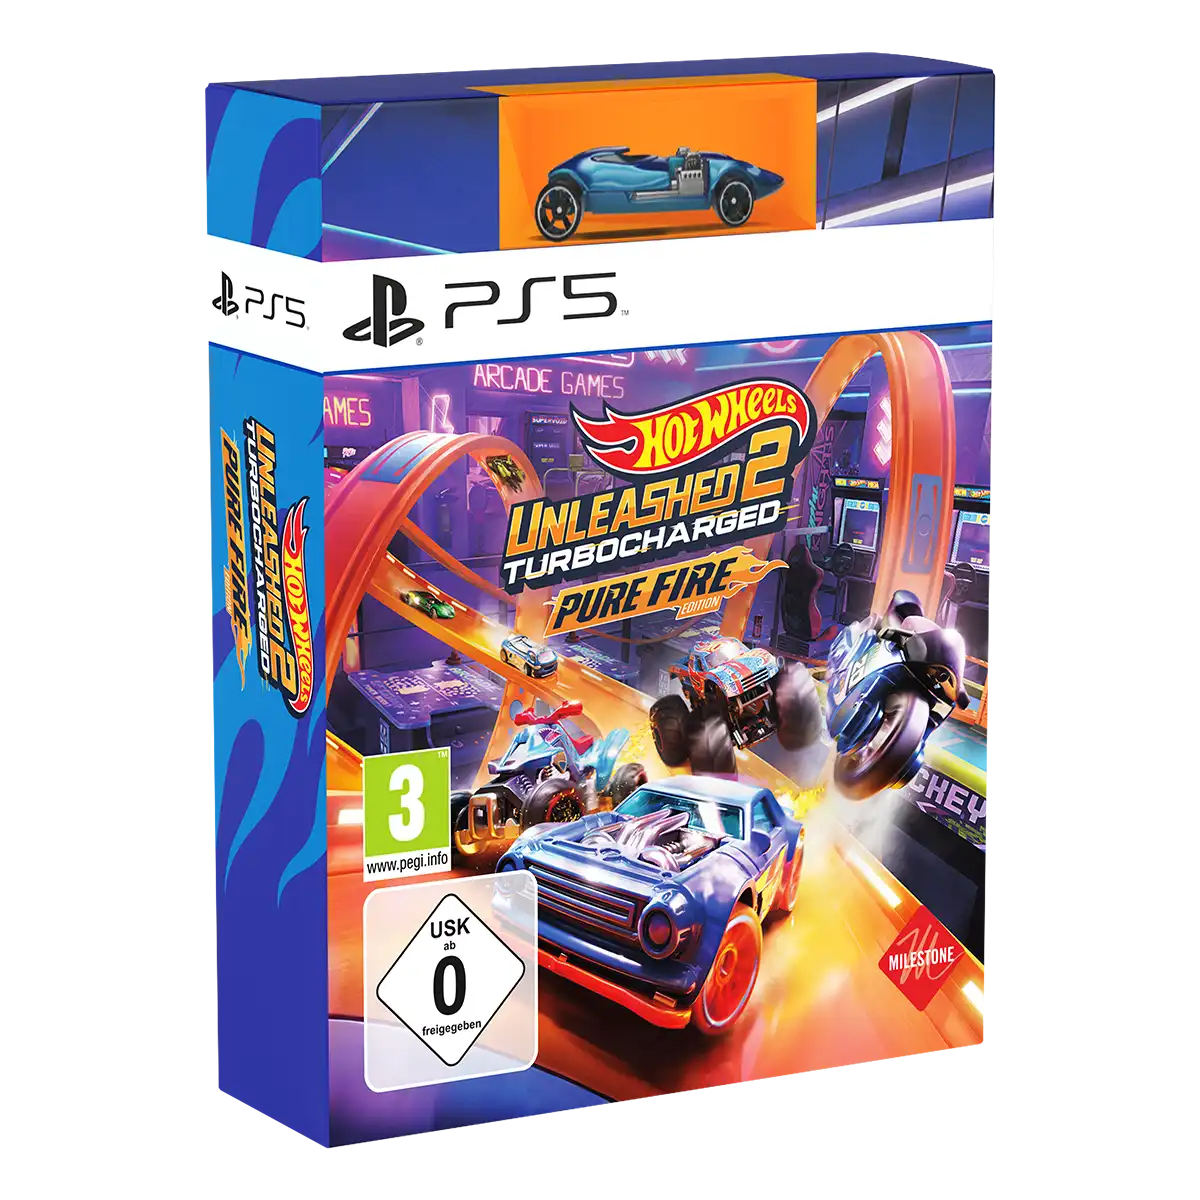 Hot Wheels Unleashed 2 Turbocharged Pure Fire Edition (PS5) Image 2